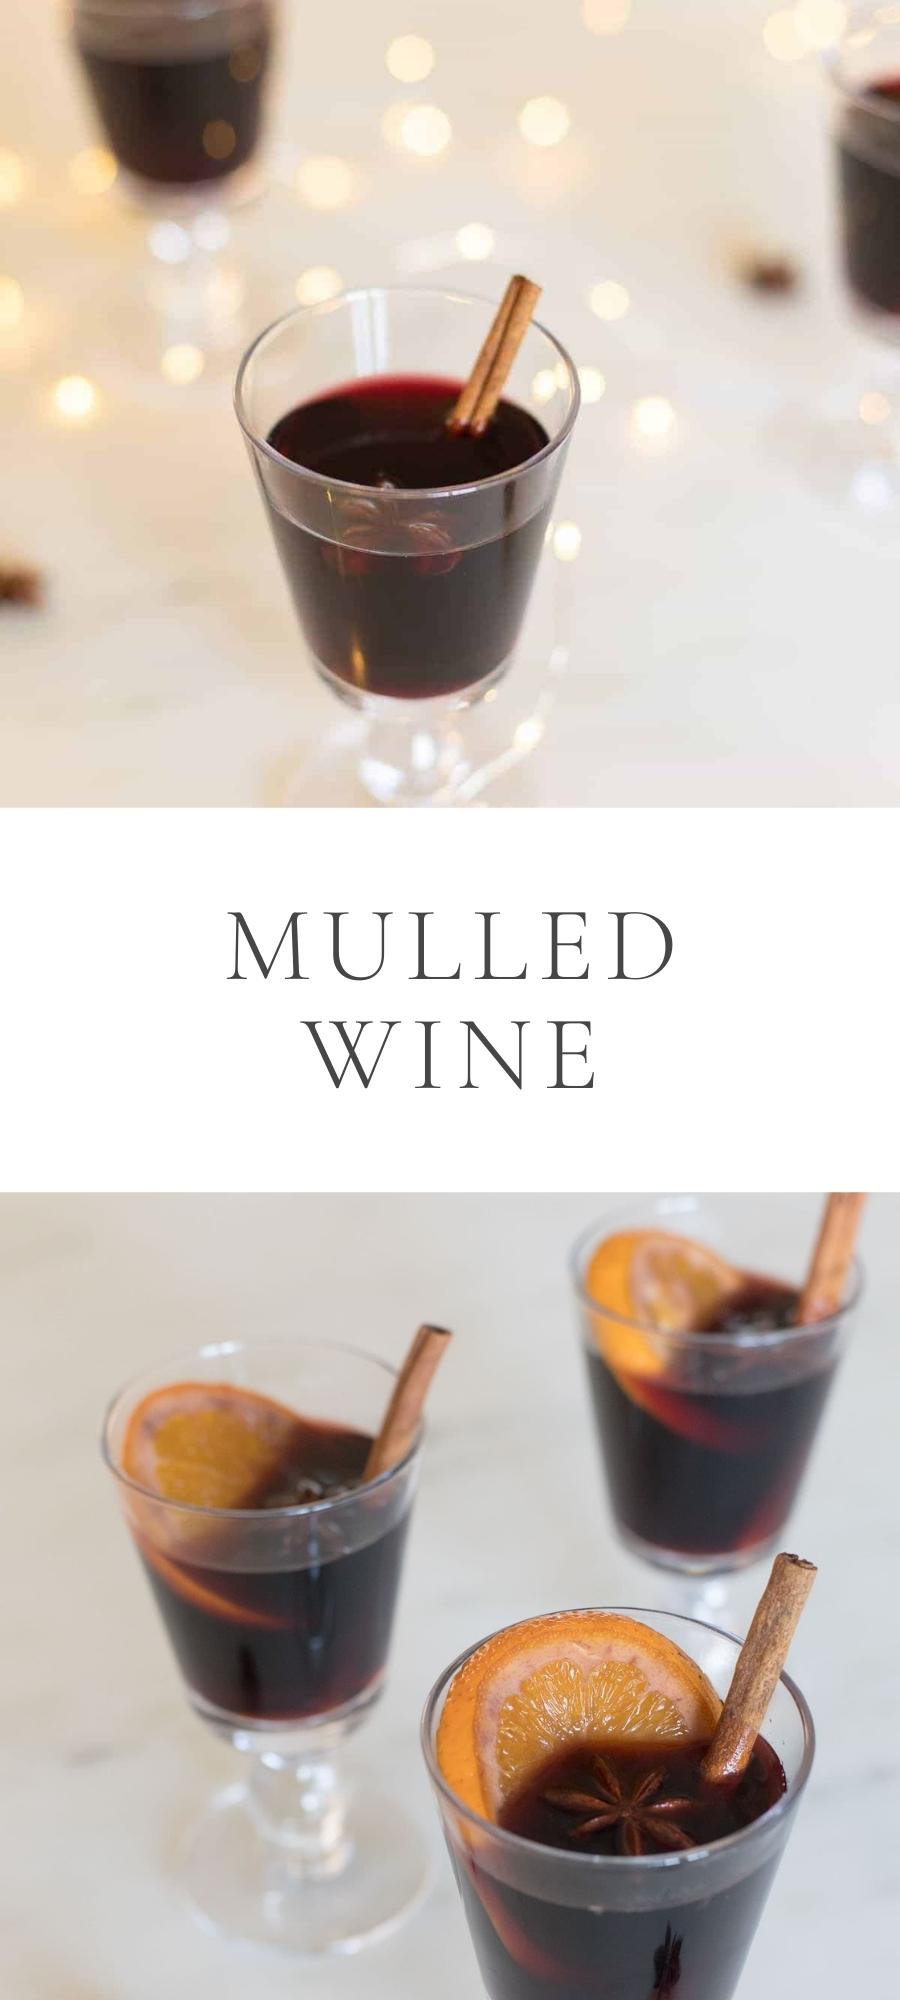 Mulled Wine with cinnamon sticks and orange slices in clear glasses